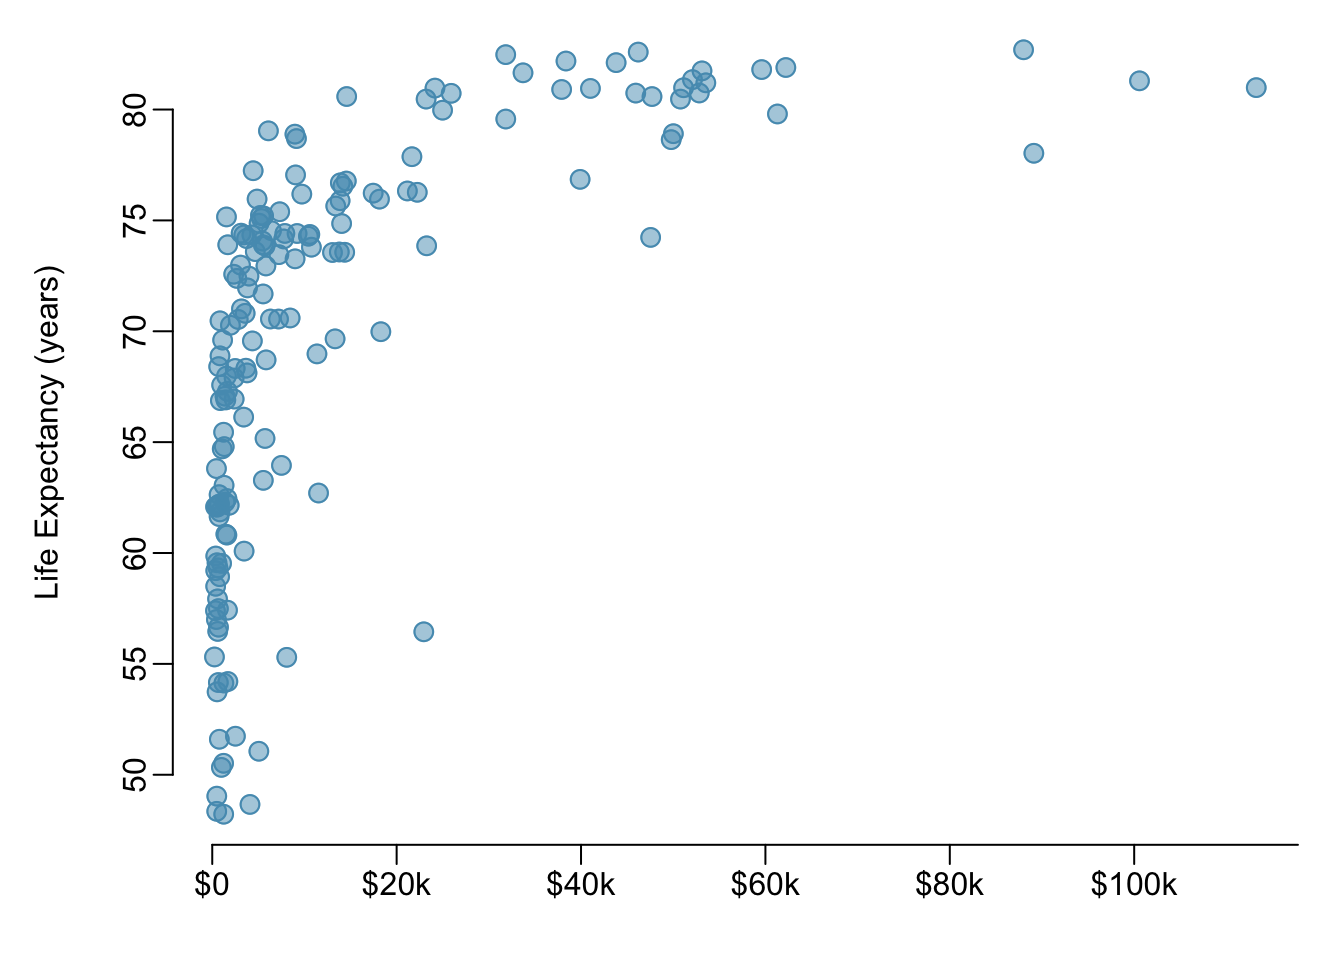 A scatterplot of life expectancy (years) versus annual per capita income (US dollars) in the `wdi.2011` dataset from the oibiostat package.